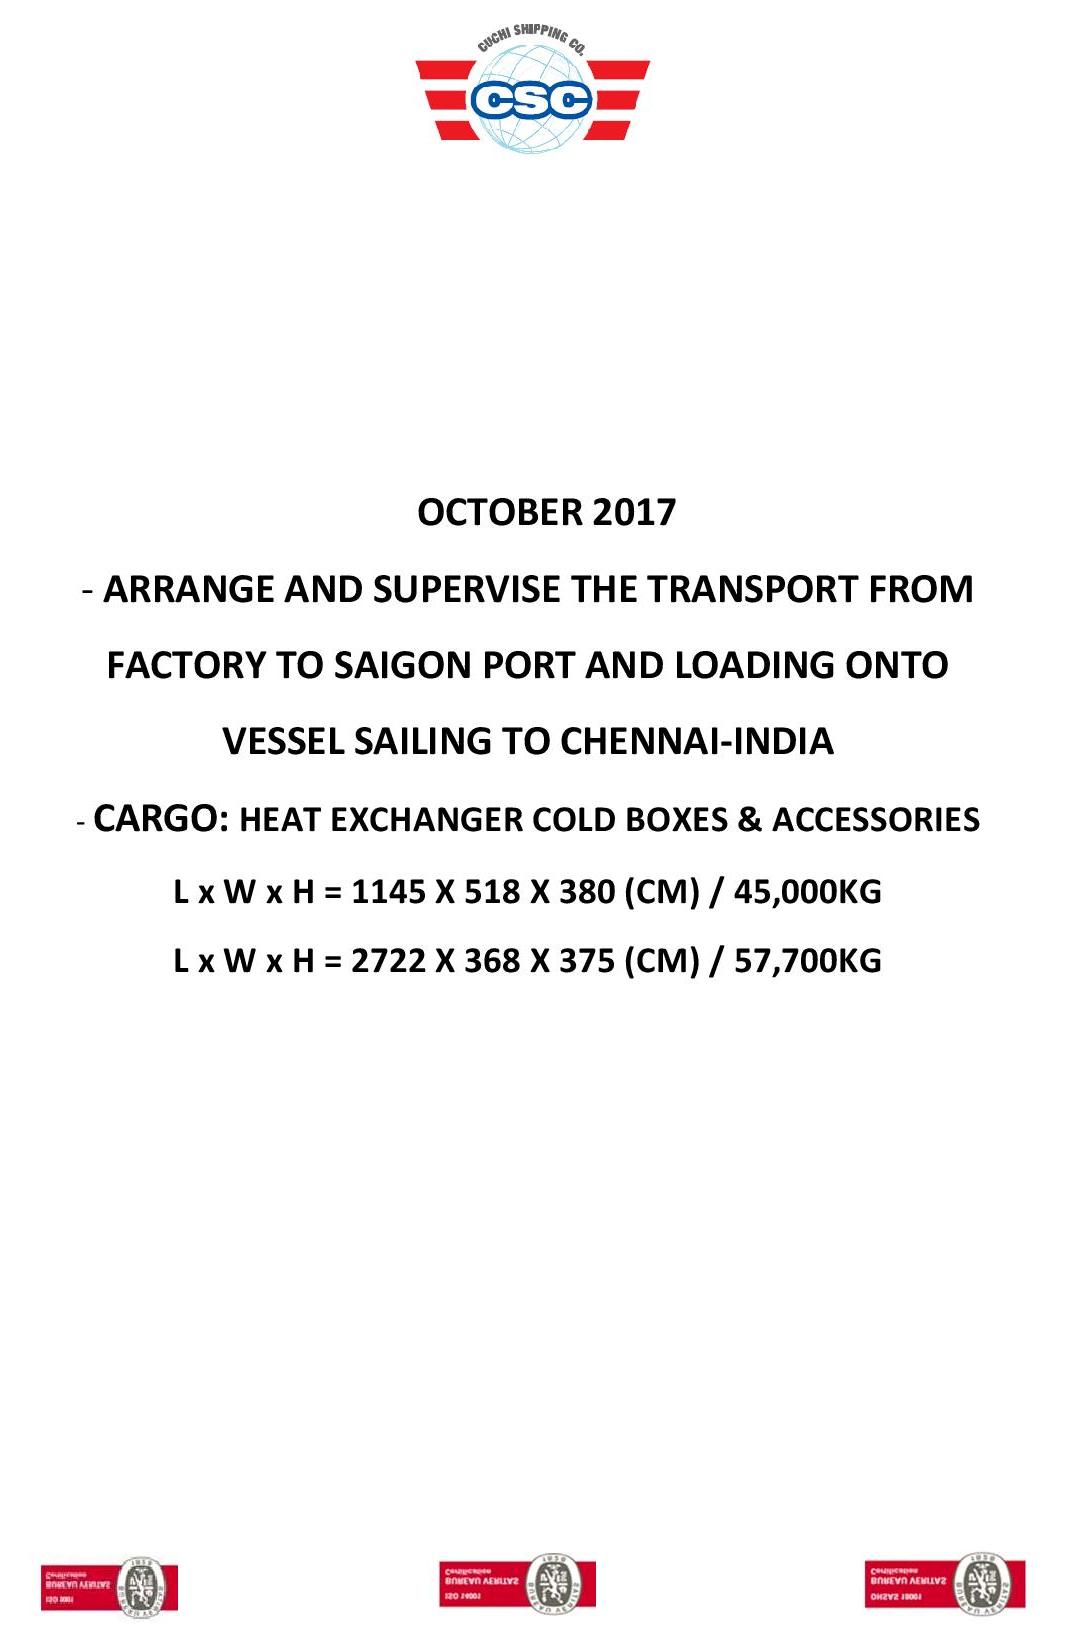 OCTOBER 2017 - TRANSPORT COLD BOX-ACCESSORIES-page-001.jpg